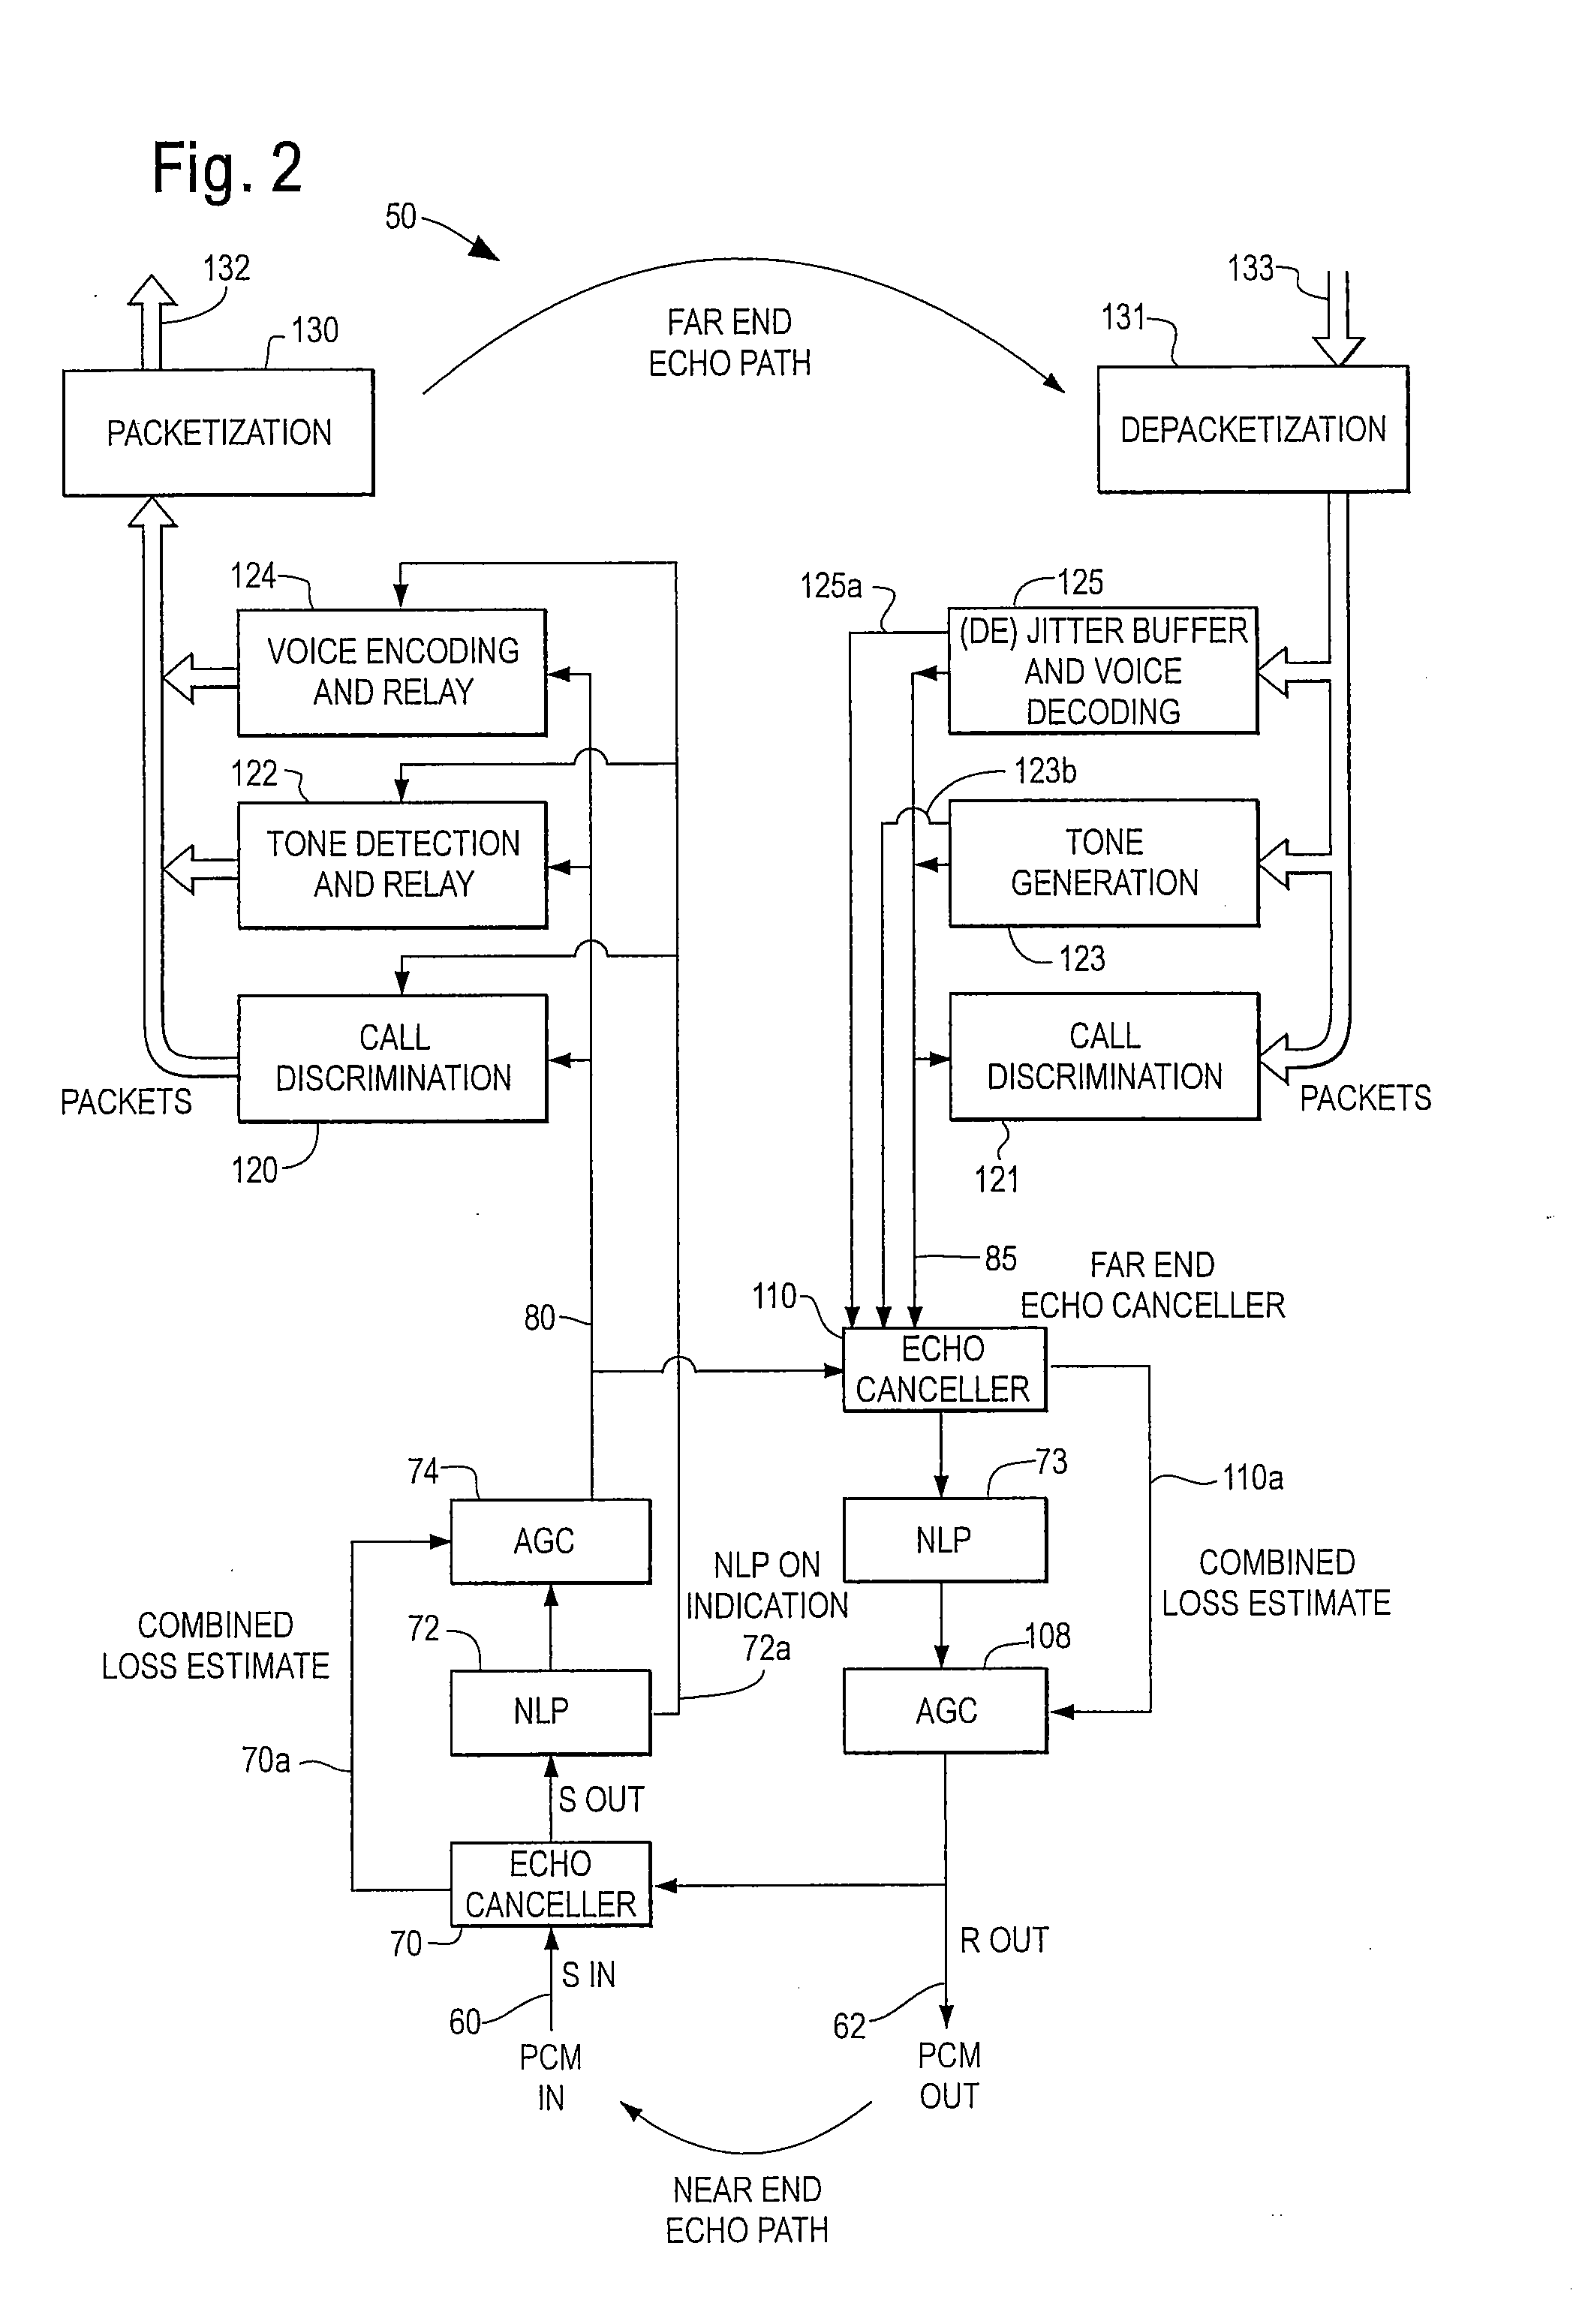 System and method for operating a packet voice far-end echo cancellation system